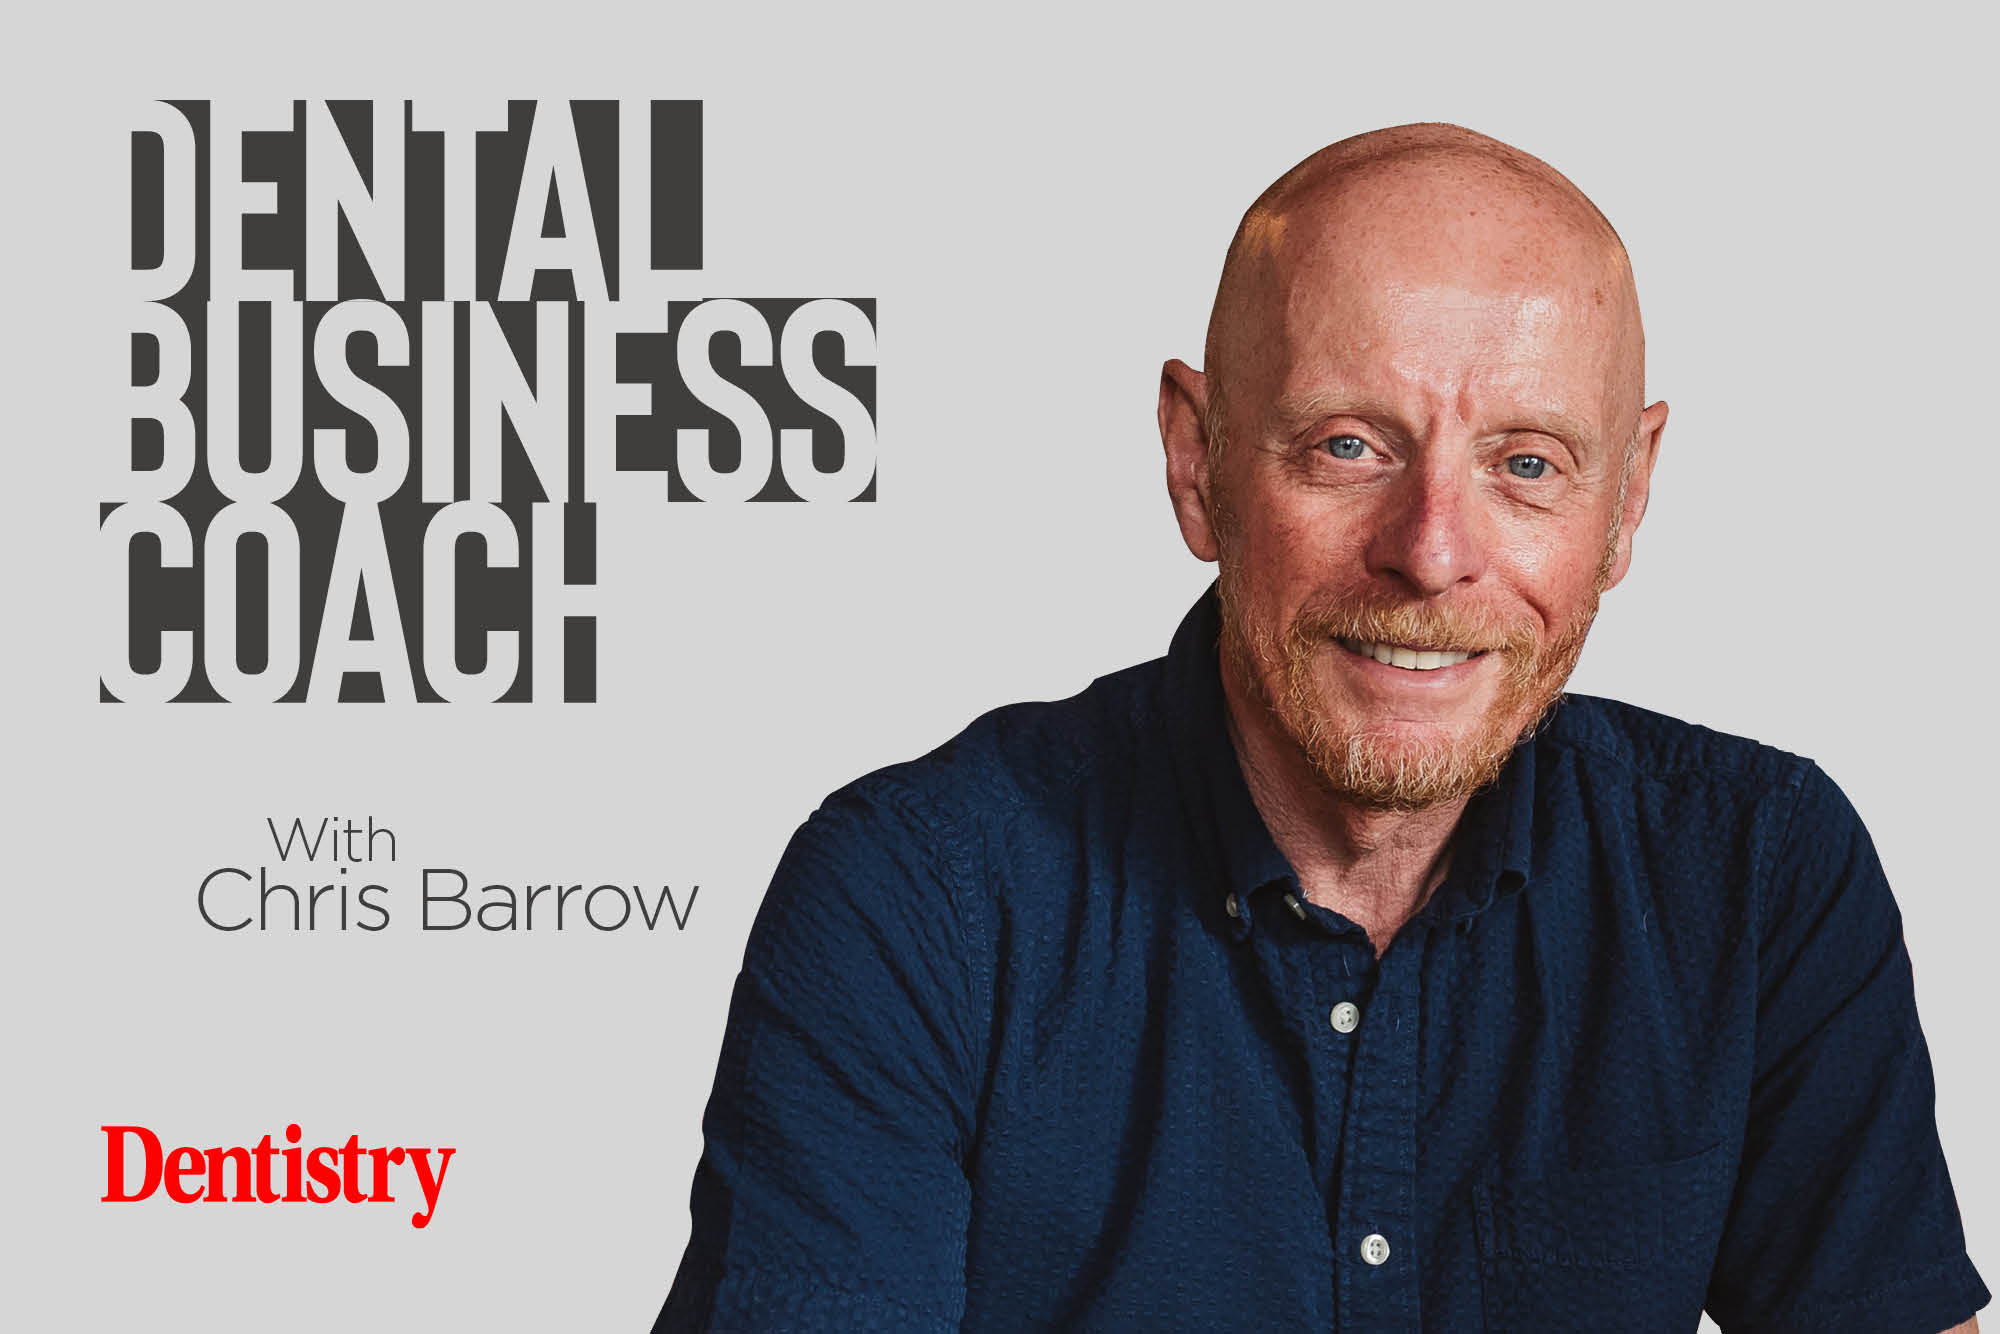 chris barrow dental business coach discusses selling your business